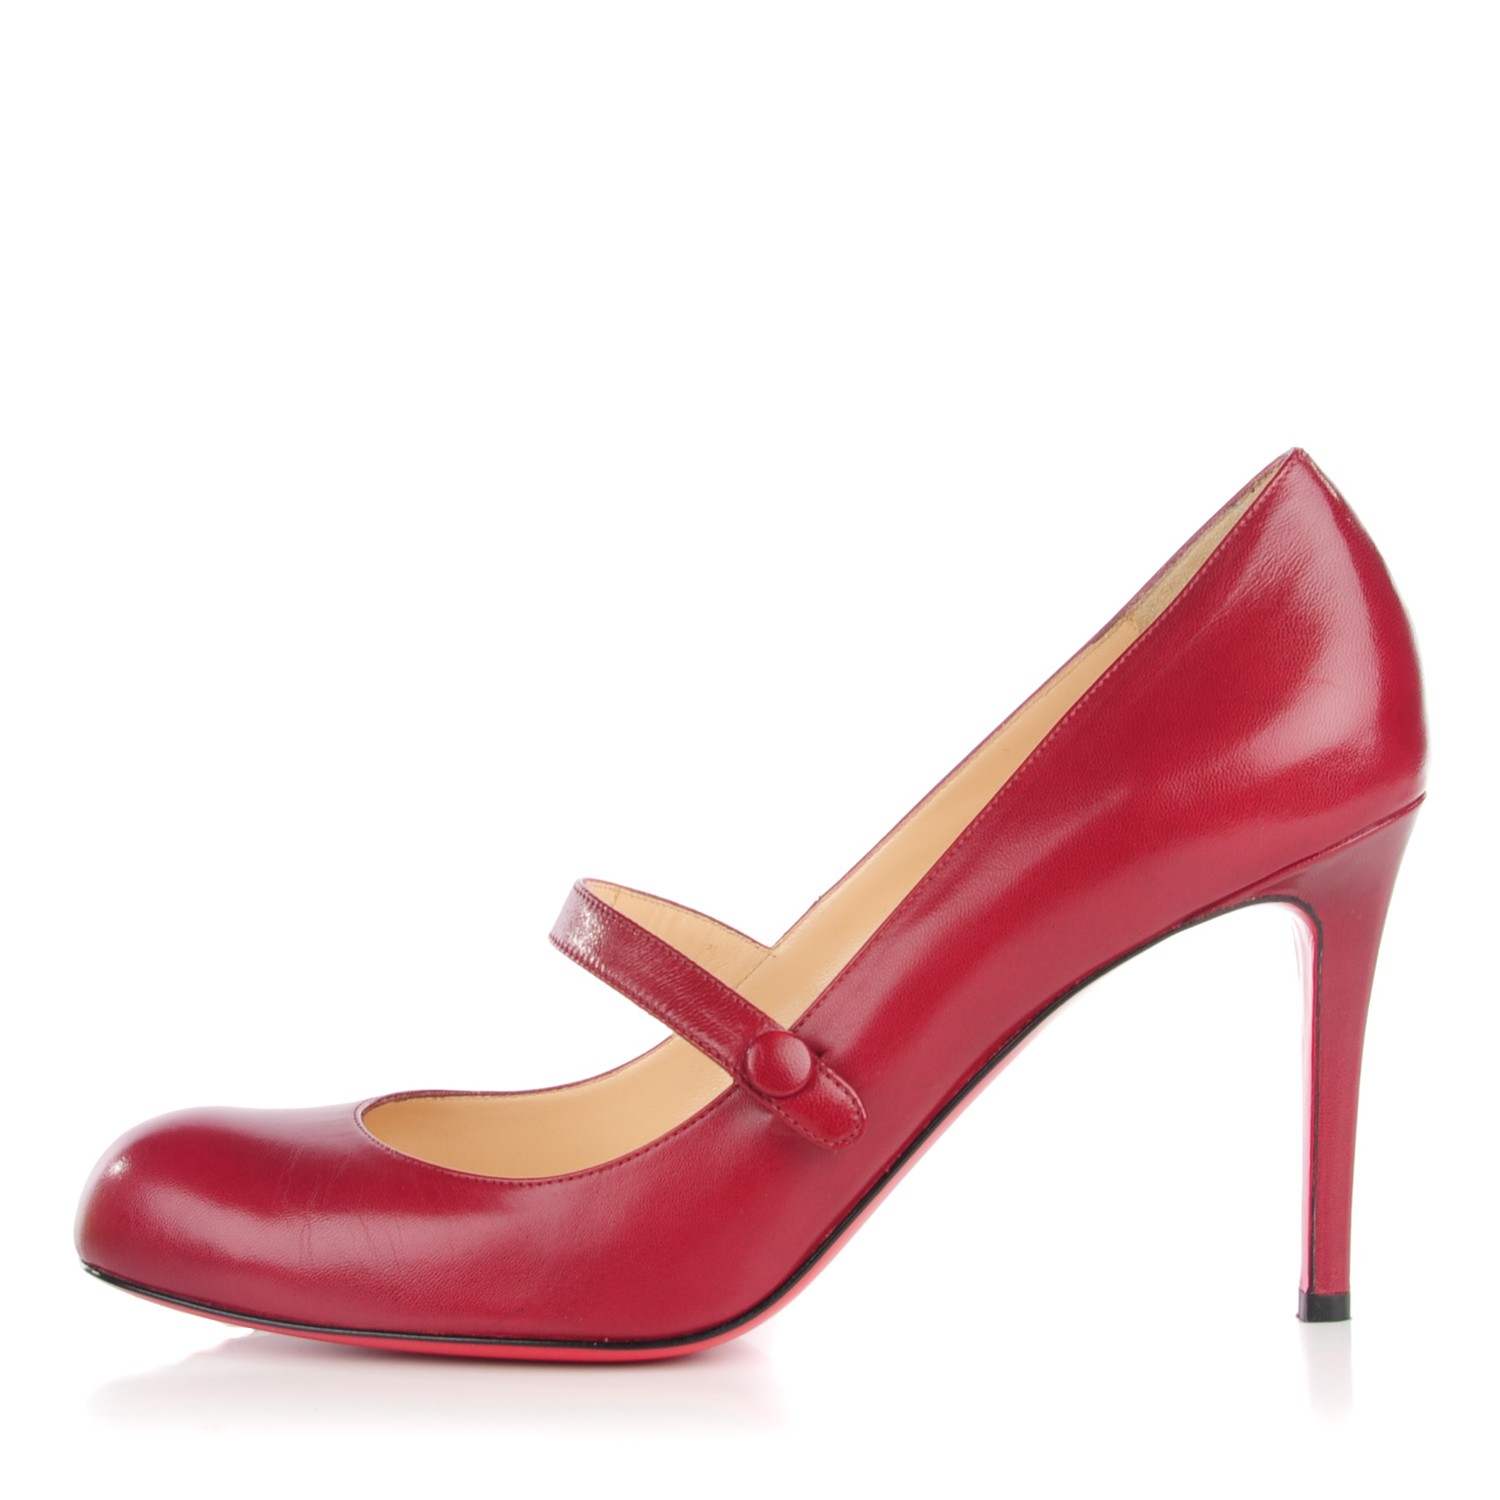 CHRISTIAN LOUBOUTIN Kid Leather Wallis 85 Mary Jane Pumps 40.5 Red ...